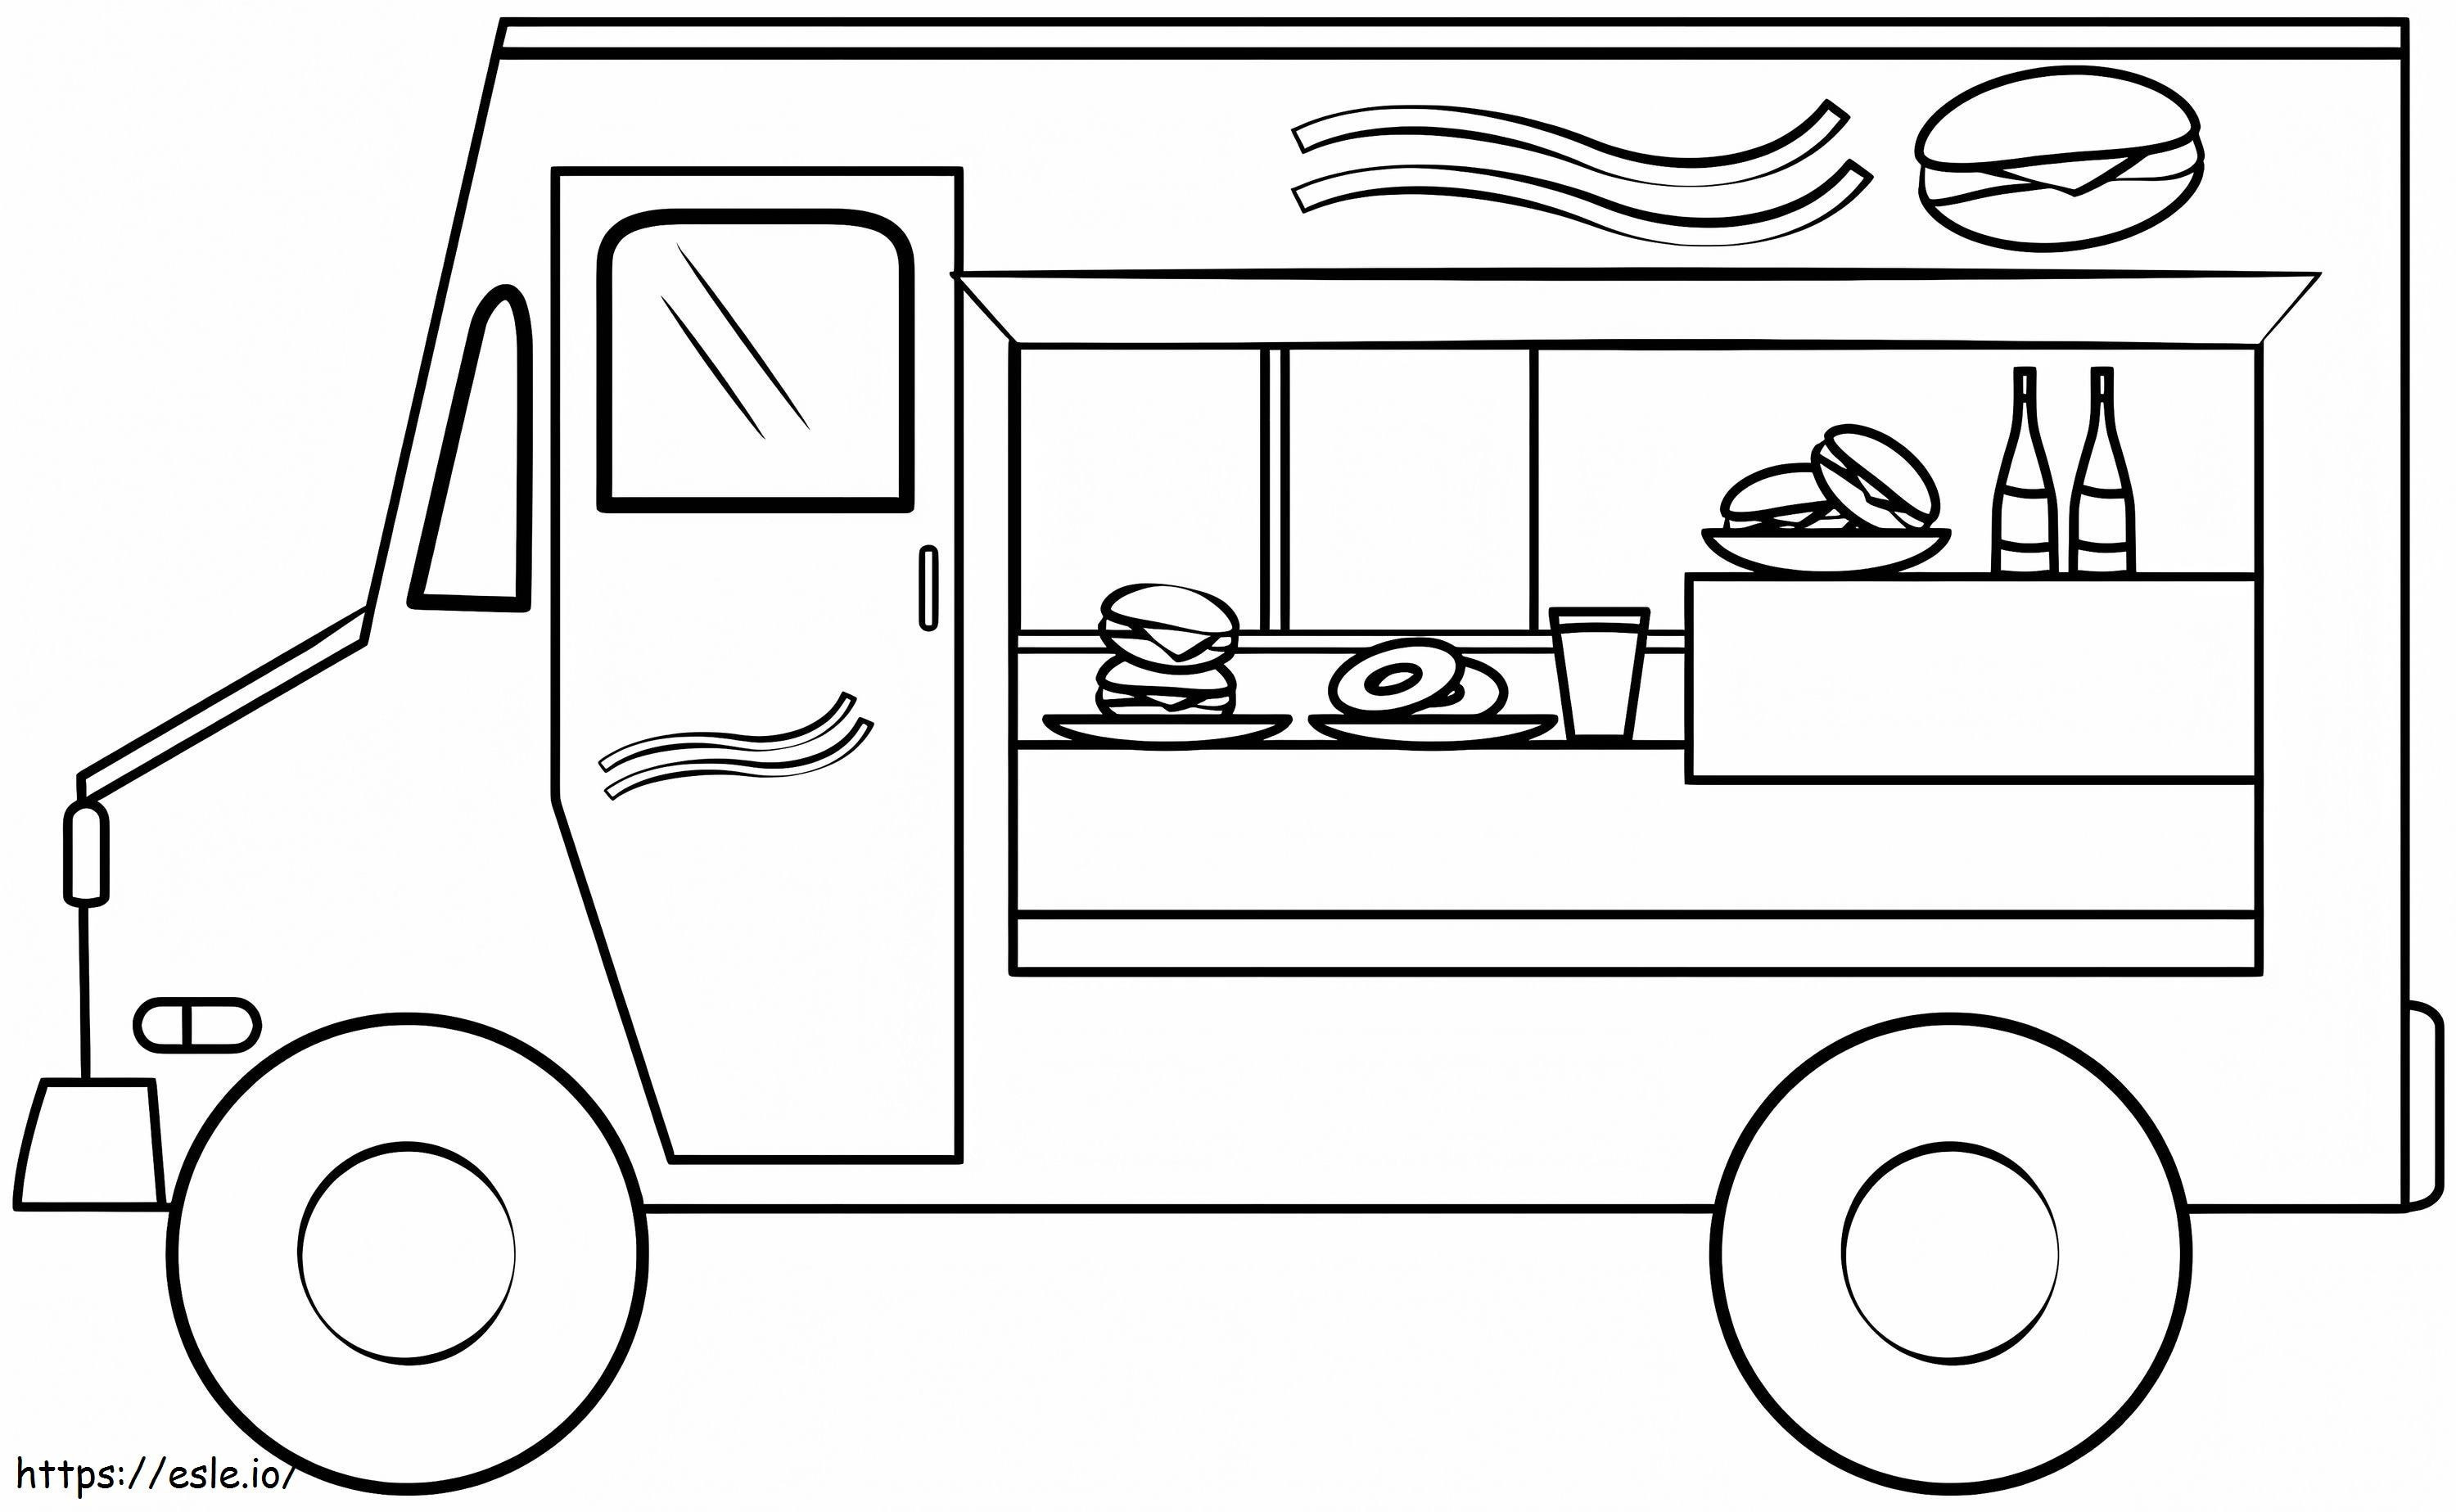 Food Truck coloring page